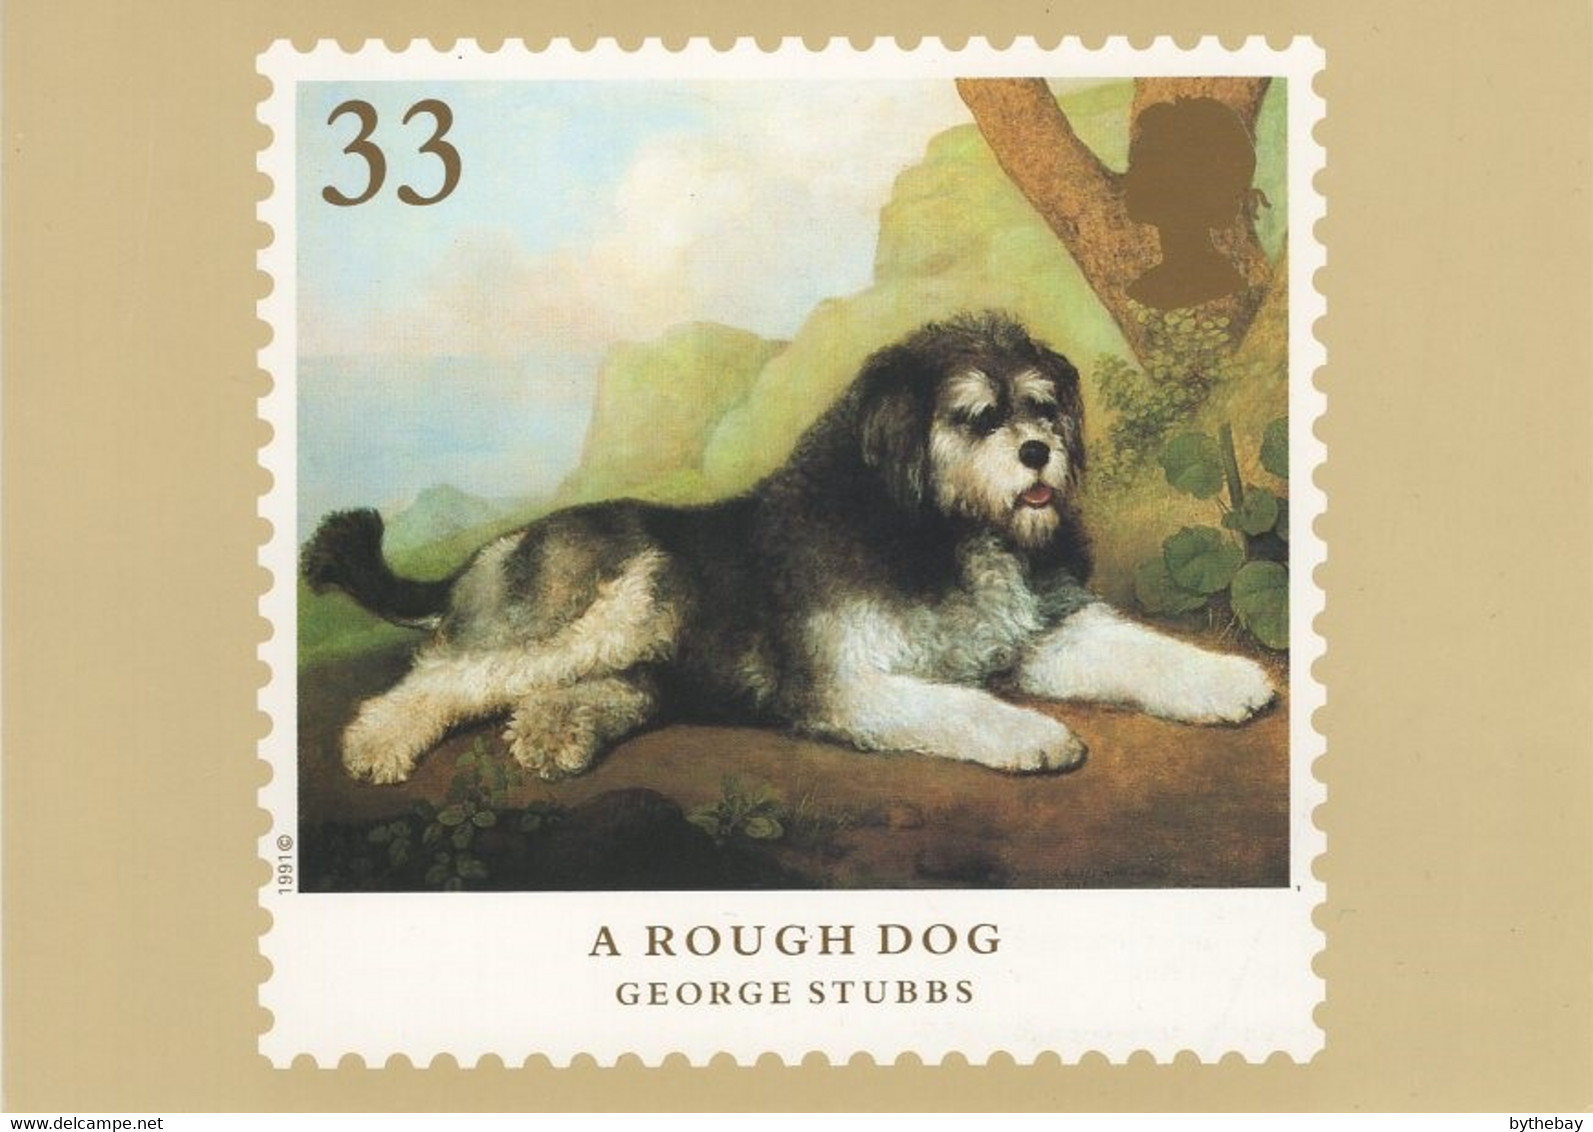 Great Britain 1991 PHQ Card Sc 1348 33p A Rough Dog By G Stubbs - PHQ Cards